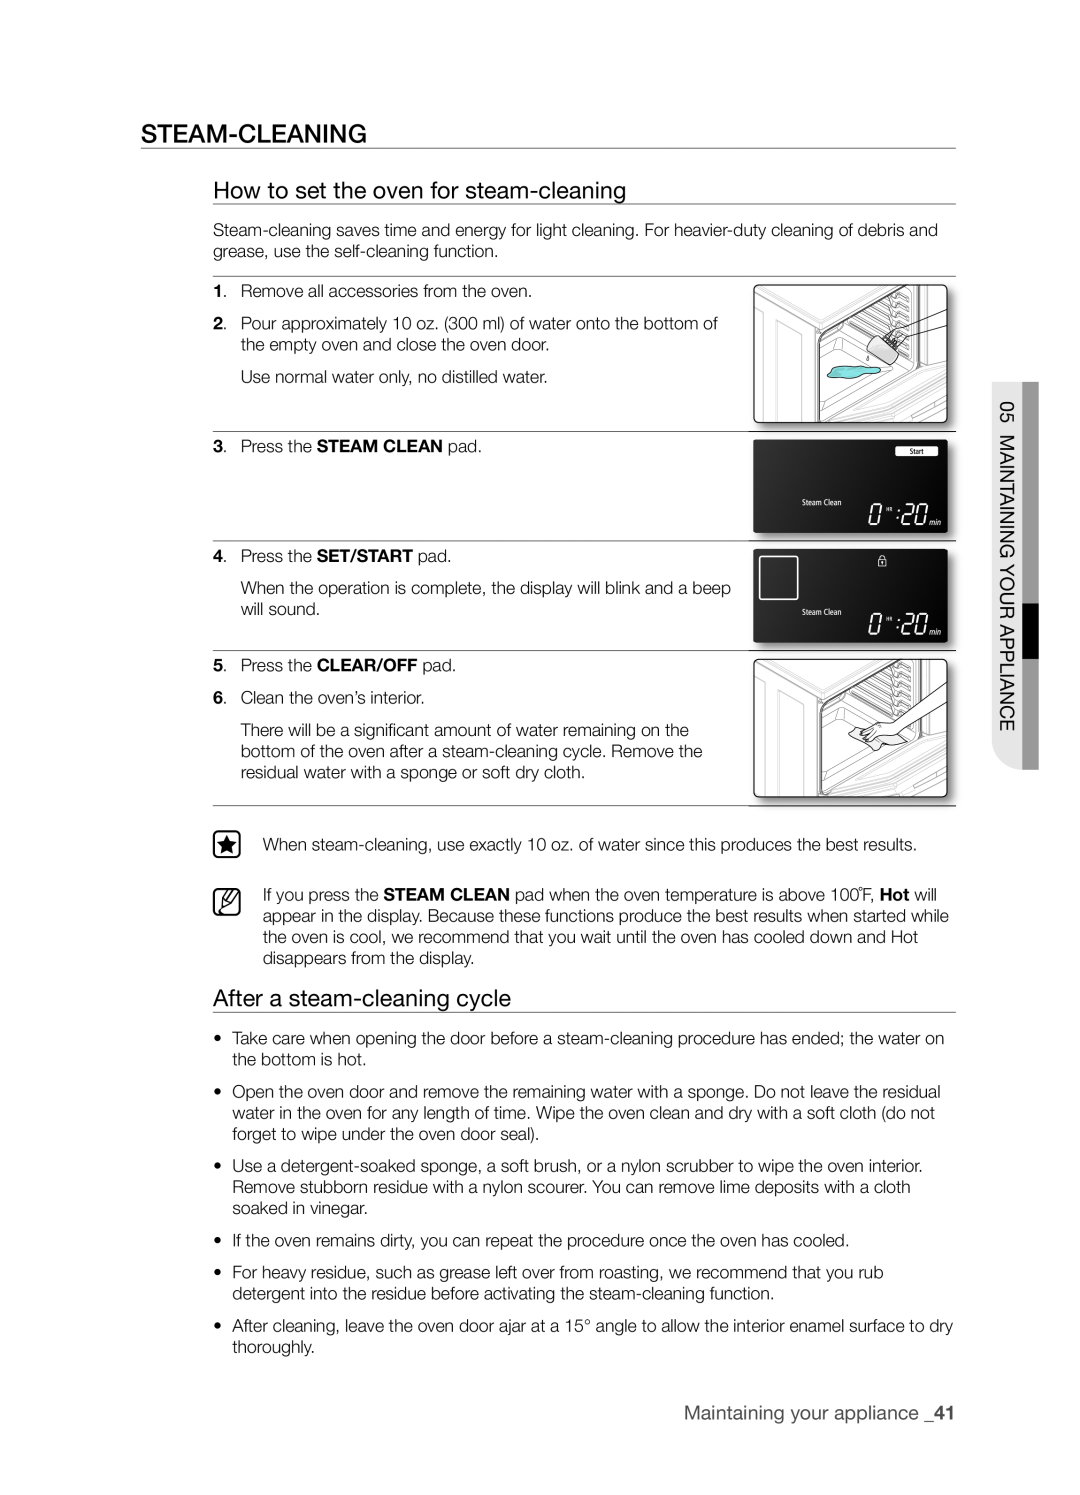 Samsung FTQ386LWX user manual Steam-Cleaning, How to set the oven for steam-cleaning, After a steam-cleaningcycle 